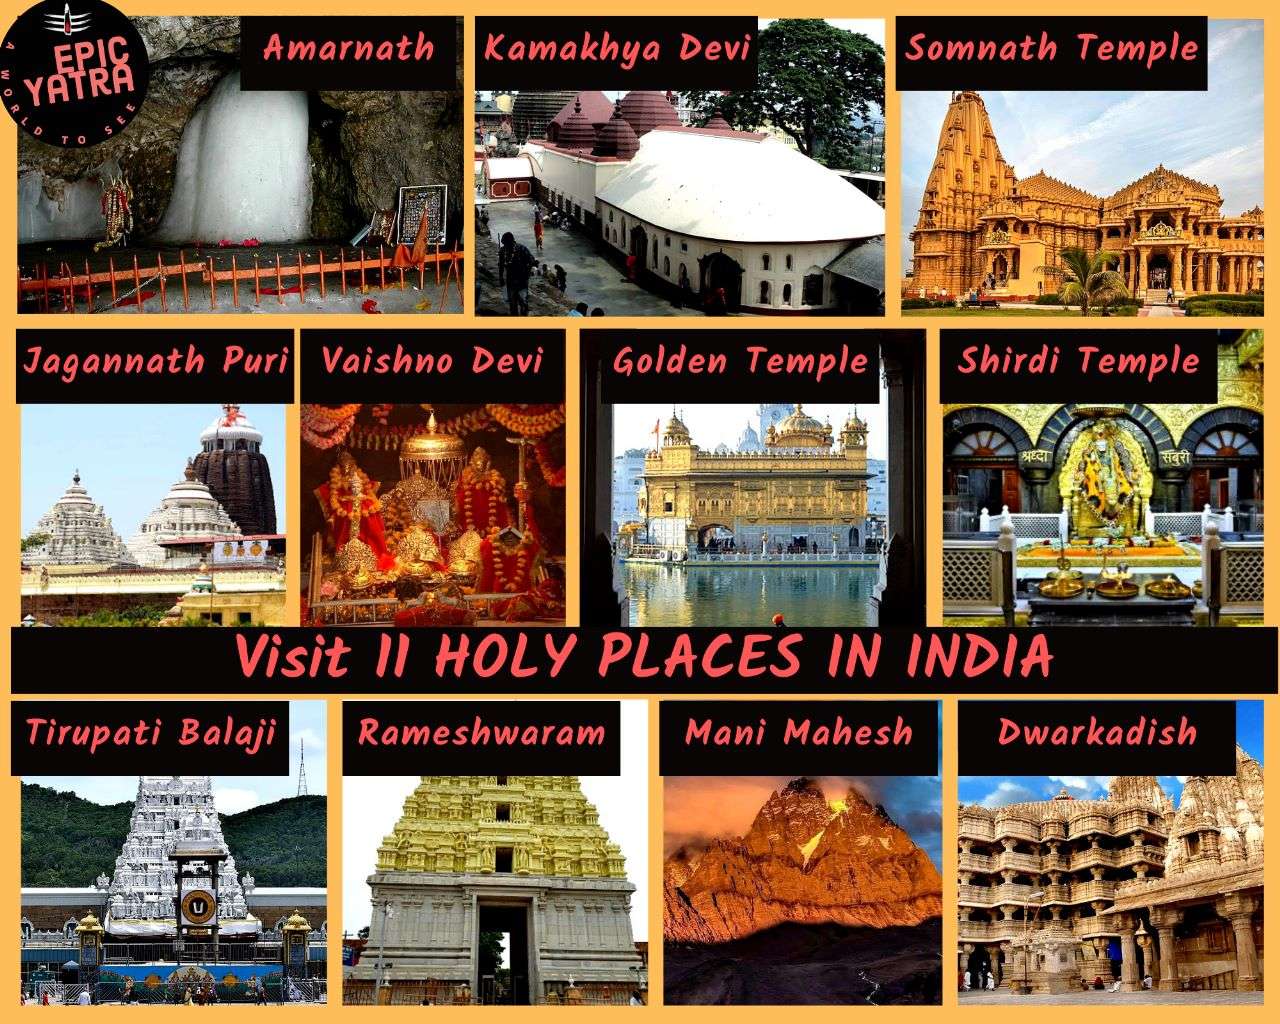 11 Holy places in India that every tourist must visit